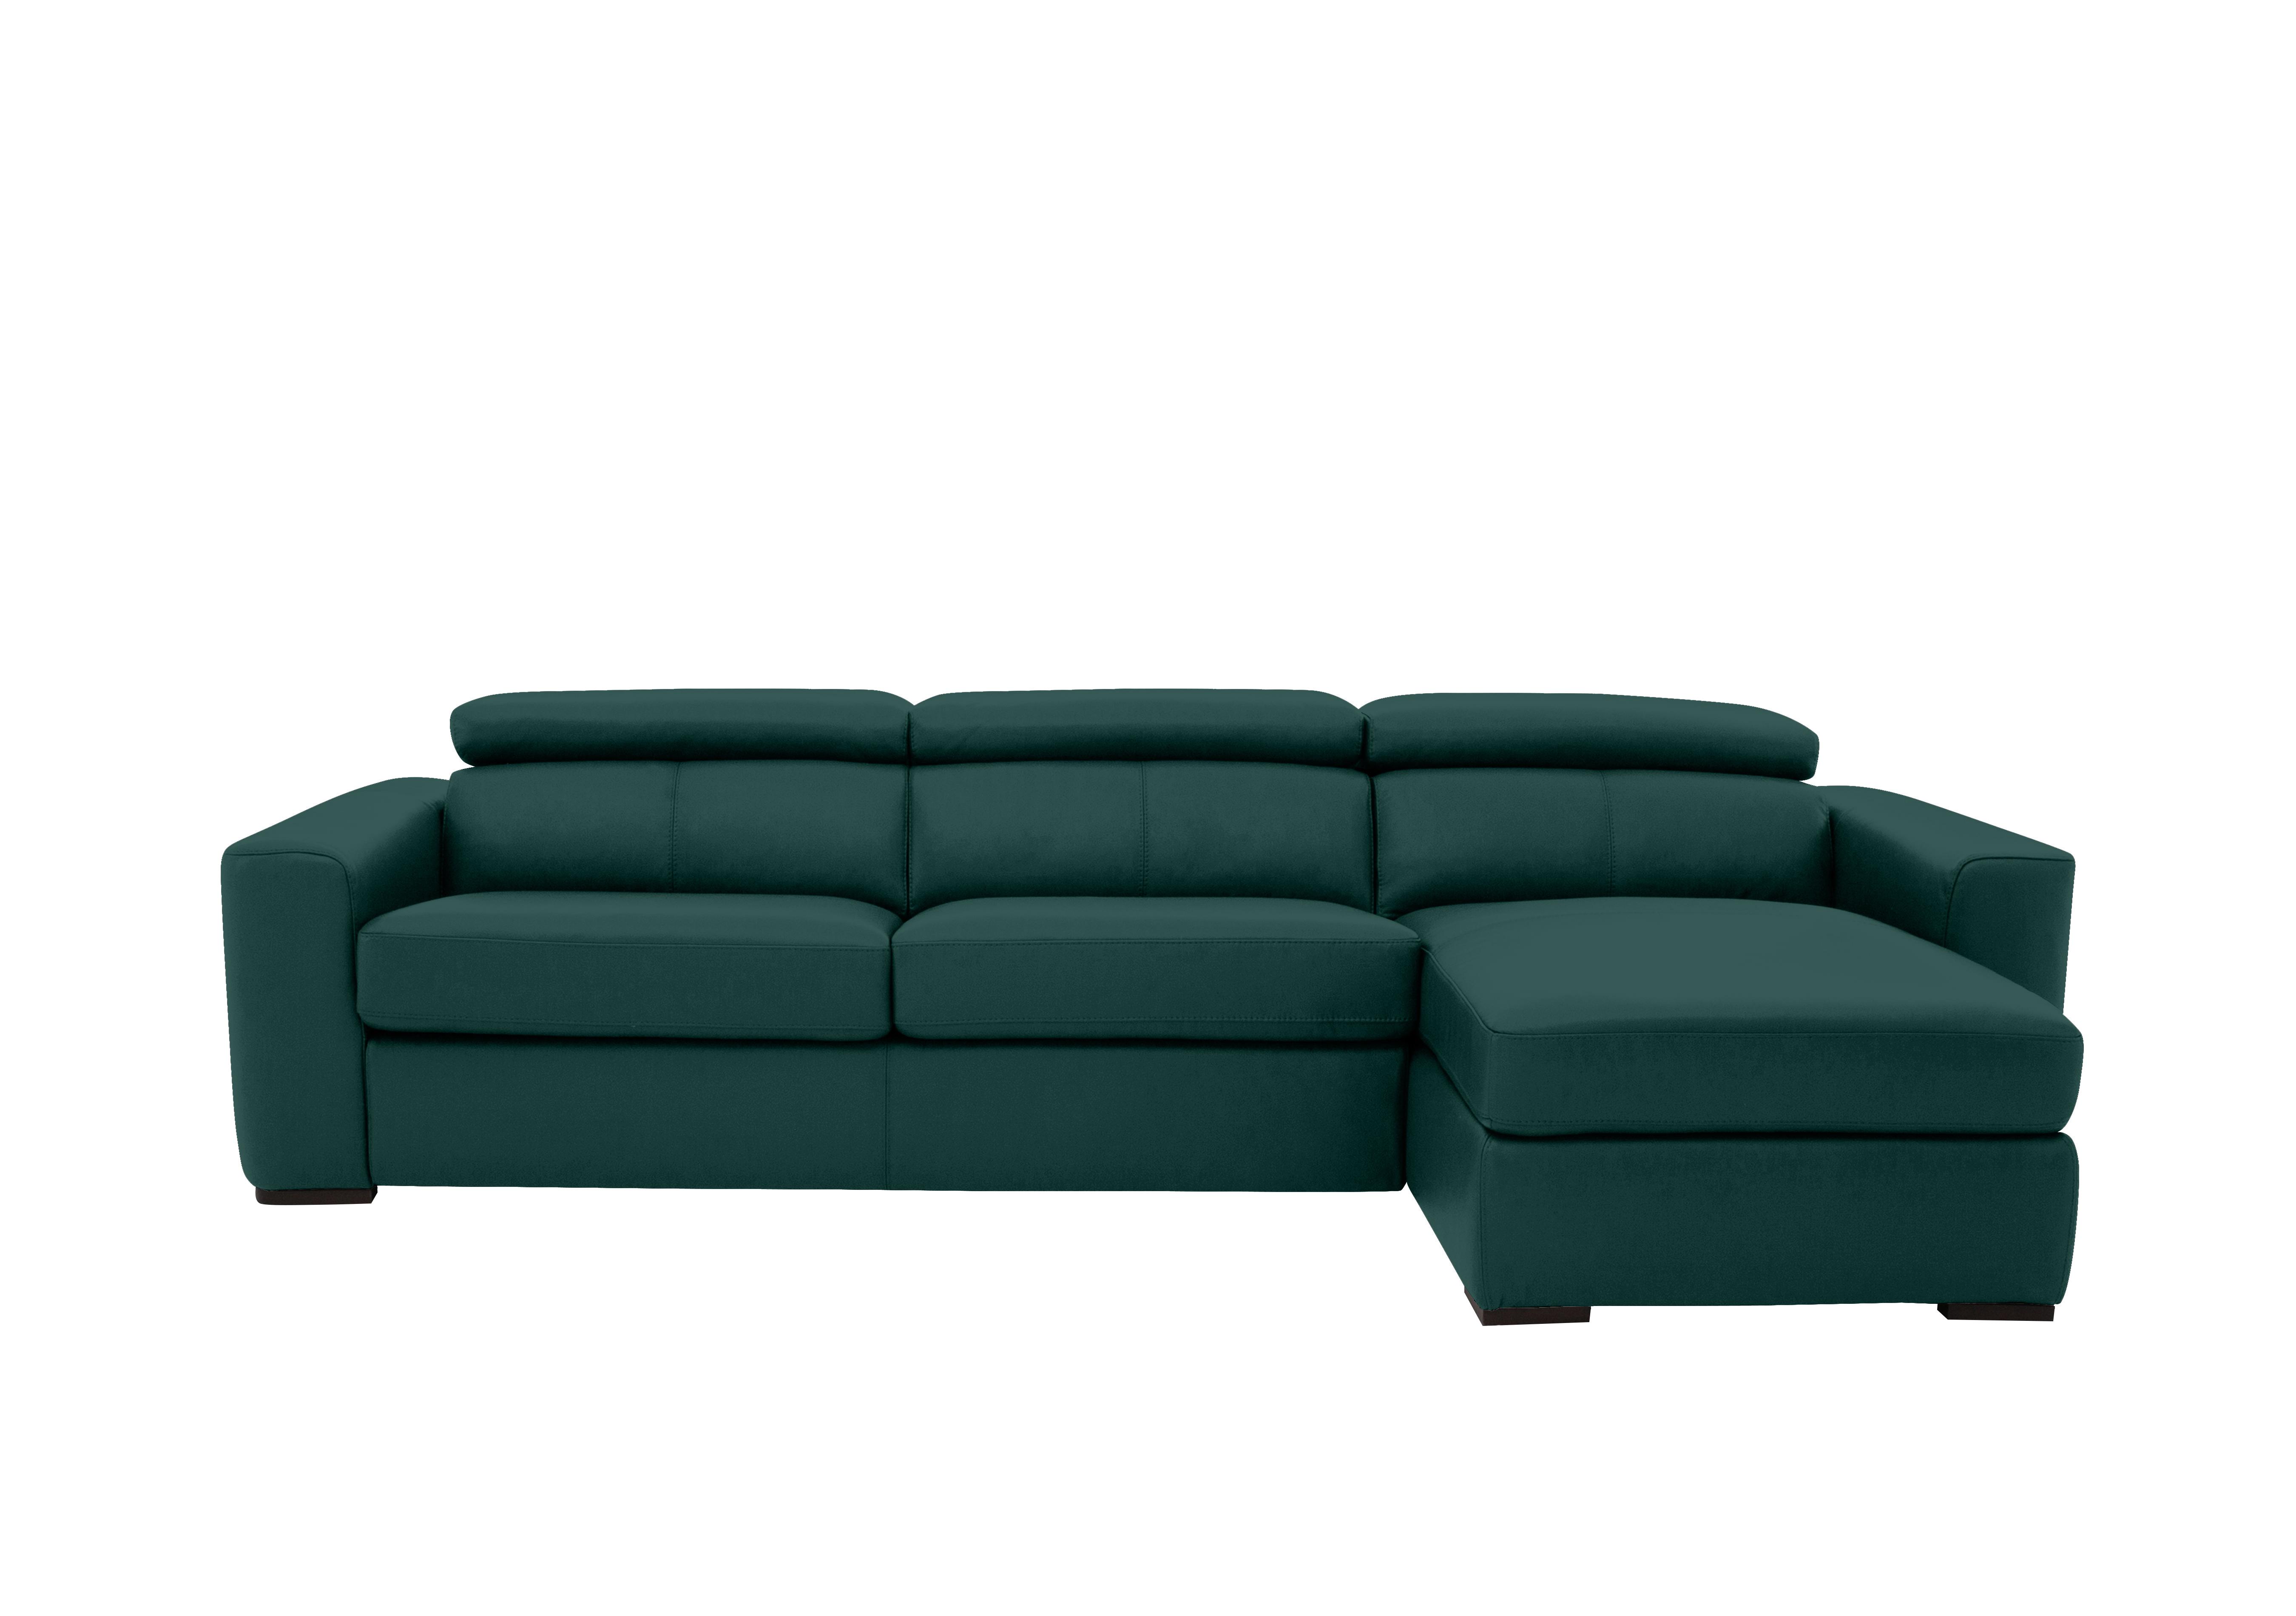 Infinity Leather Corner Chaise Sofa with Storage in Bv-301e Lake Green on Furniture Village